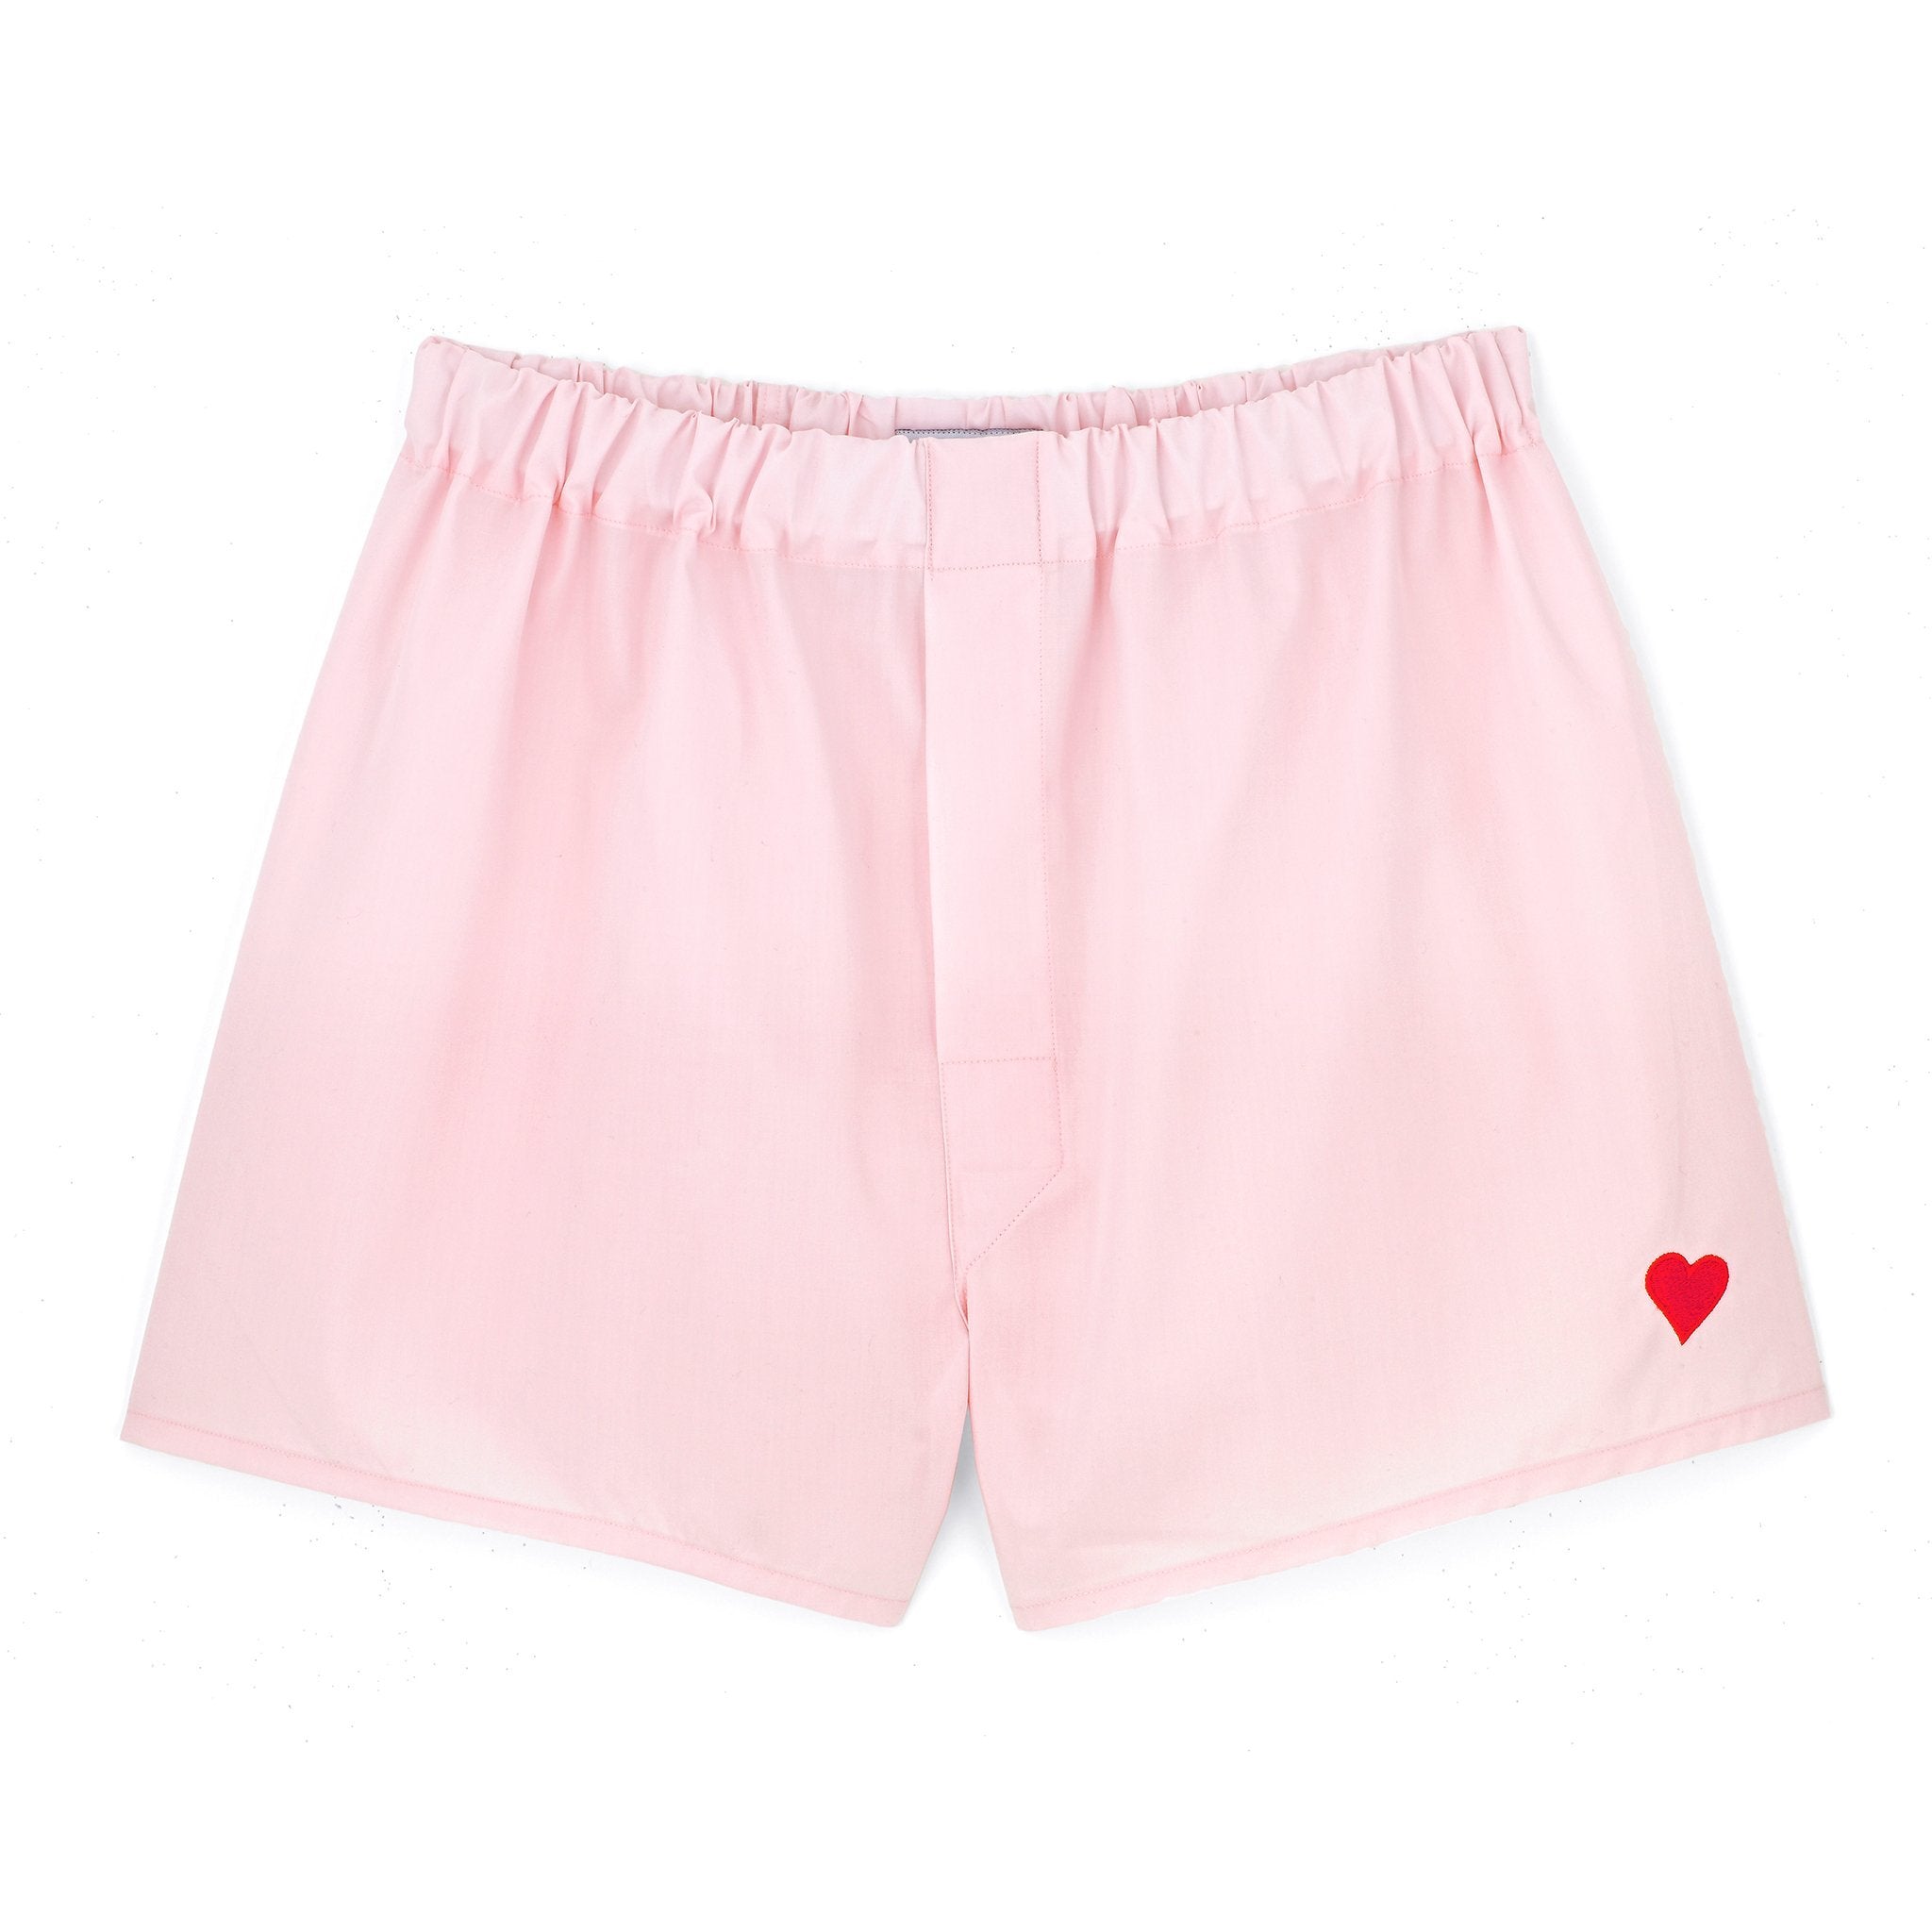 Love Heart Pink Superior Cotton Boxer Shorts - Classic freeshipping - Emma Willis